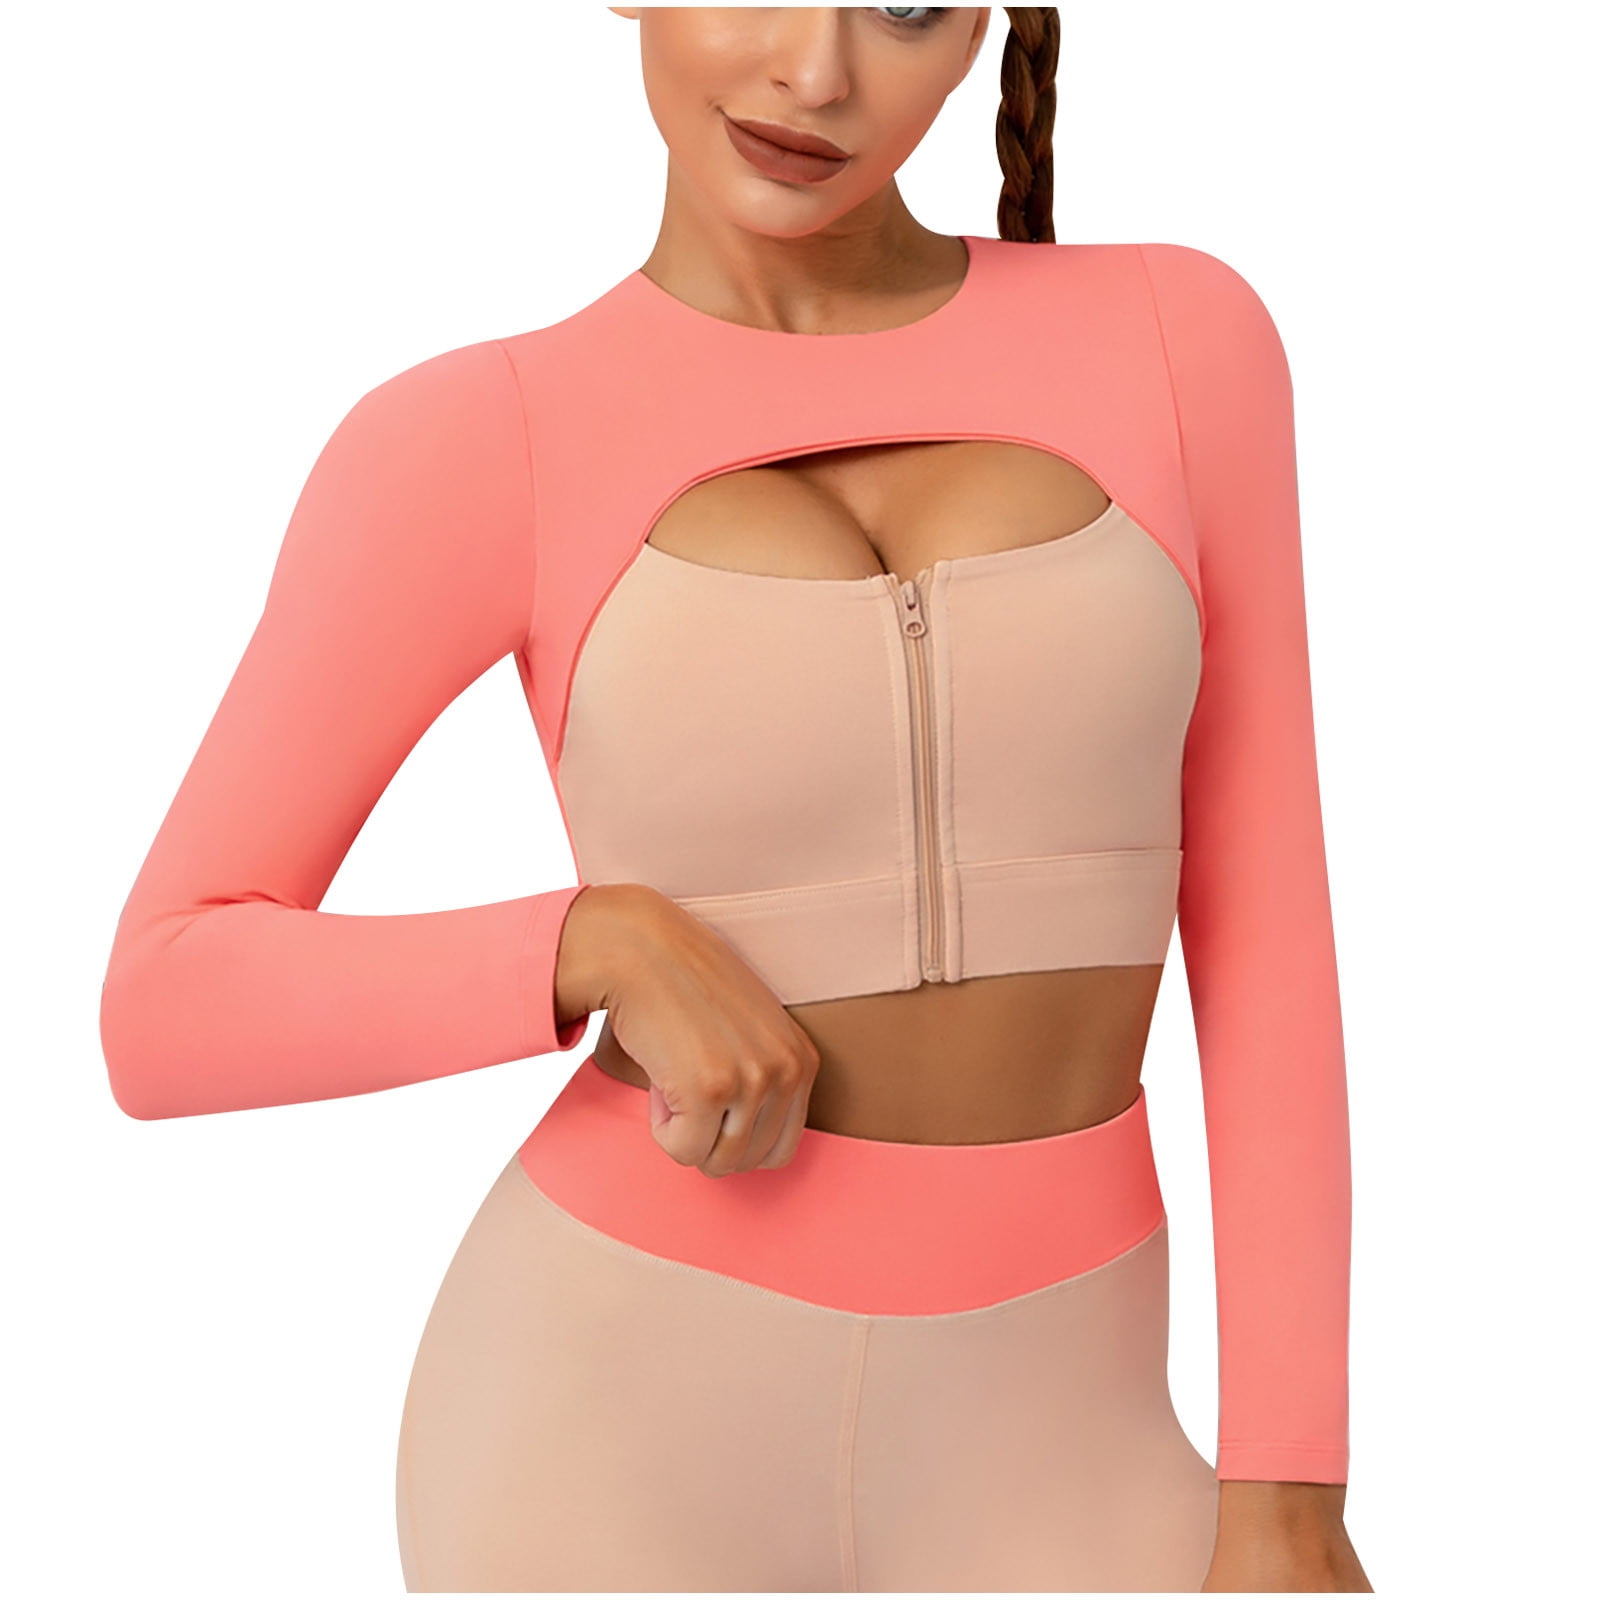 Womens Cutout Workout Crop Tops Zipper Front Long Sleeves Yoga Shirts Color  Block Stretch Slim Fit Gym Athletic Sports Shirts